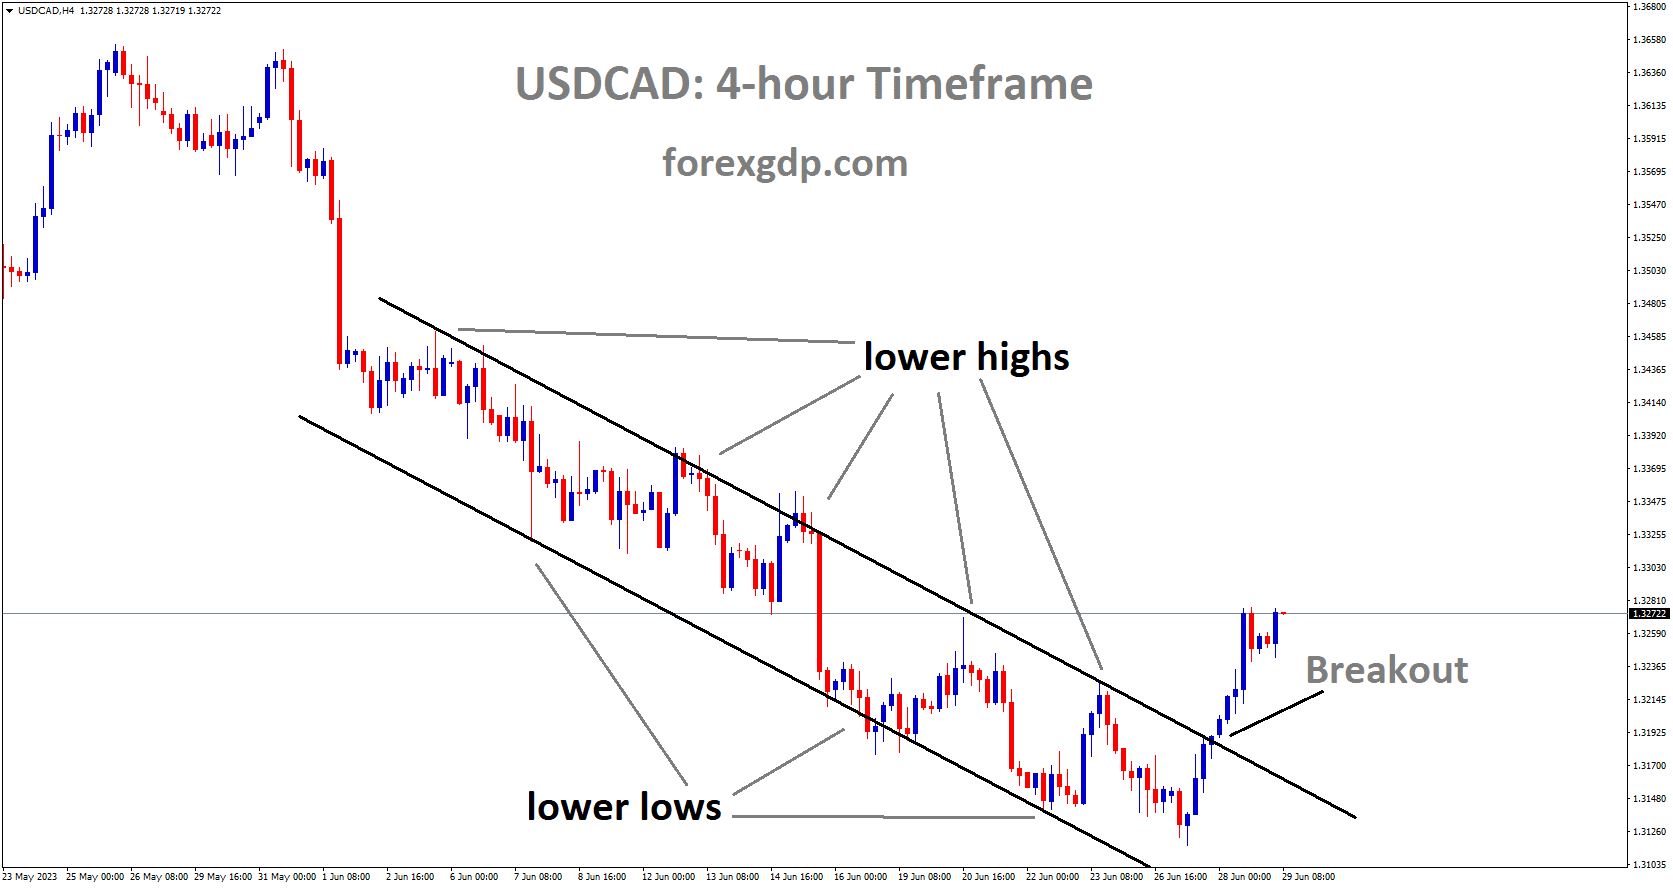 USDCAD is moving in descending channel and the market has broken at the lower high area of the channel.